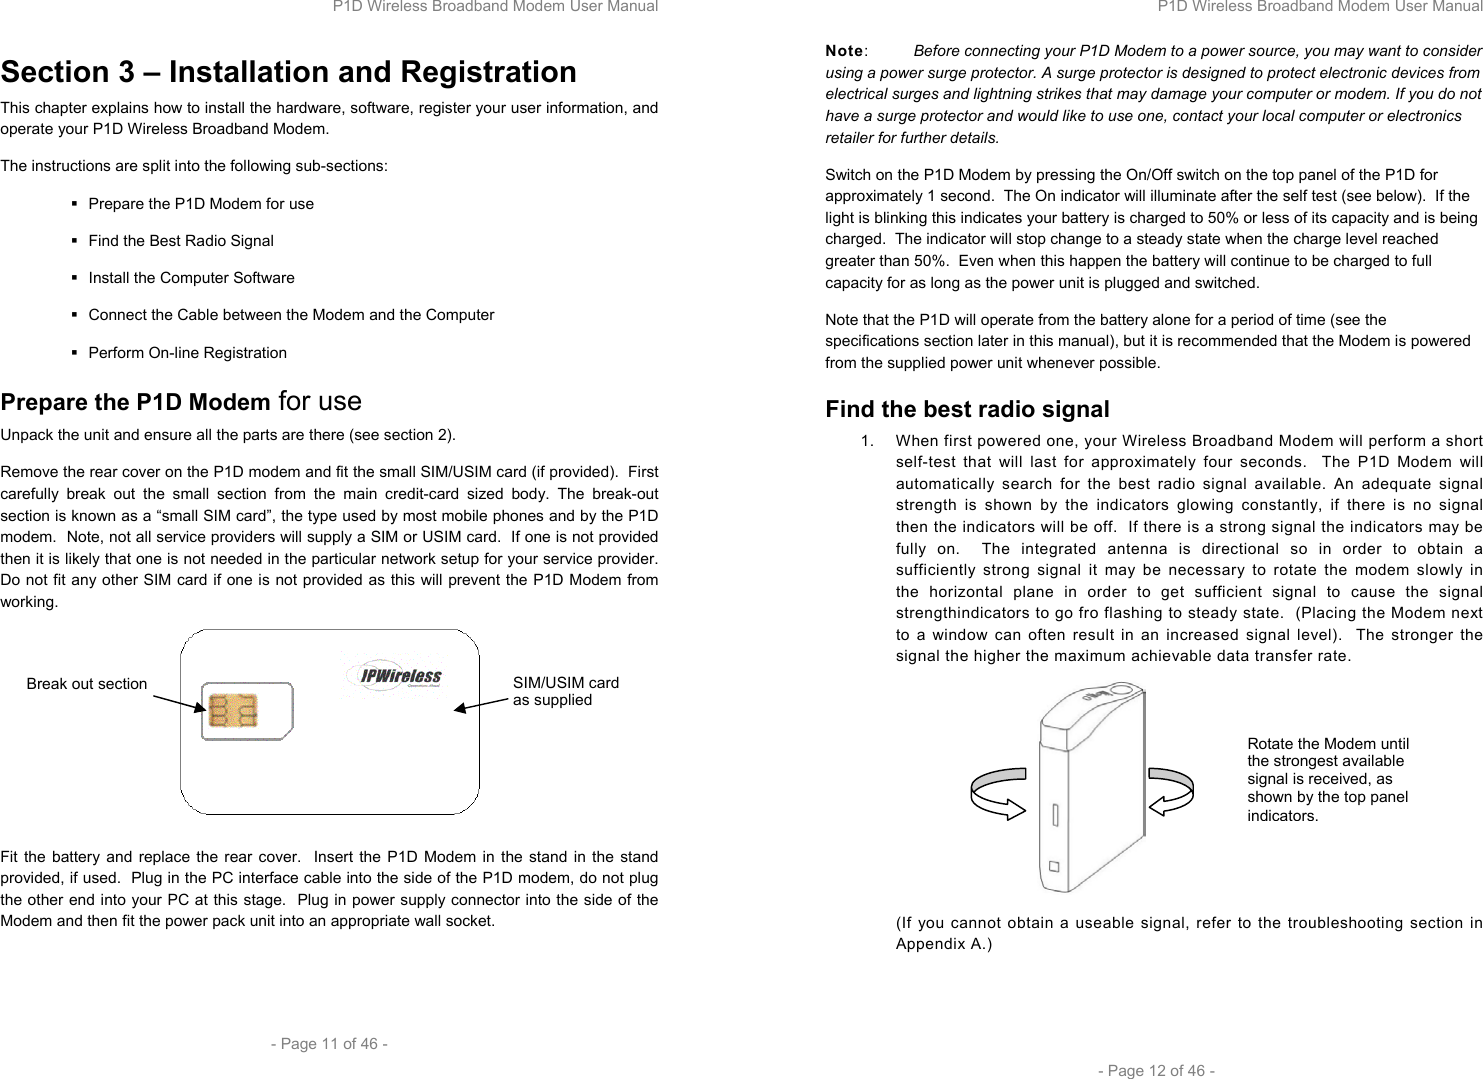 P1D Wireless Broadband Modem User Manual  - Page 11 of 46 -  Section 3 – Installation and Registration This chapter explains how to install the hardware, software, register your user information, and operate your P1D Wireless Broadband Modem.  The instructions are split into the following sub-sections:   Prepare the P1D Modem for use   Find the Best Radio Signal   Install the Computer Software    Connect the Cable between the Modem and the Computer  Perform On-line Registration Prepare the P1D Modem for use Unpack the unit and ensure all the parts are there (see section 2). Remove the rear cover on the P1D modem and fit the small SIM/USIM card (if provided).  First carefully break out the small section from the main credit-card sized body. The break-out section is known as a “small SIM card”, the type used by most mobile phones and by the P1D modem.  Note, not all service providers will supply a SIM or USIM card.  If one is not provided then it is likely that one is not needed in the particular network setup for your service provider.  Do not fit any other SIM card if one is not provided as this will prevent the P1D Modem from working.   Fit the battery and replace the rear cover.  Insert the P1D Modem in the stand in the stand provided, if used.  Plug in the PC interface cable into the side of the P1D modem, do not plug the other end into your PC at this stage.  Plug in power supply connector into the side of the Modem and then fit the power pack unit into an appropriate wall socket.  SIM/USIM card as supplied Break out section P1D Wireless Broadband Modem User Manual  - Page 12 of 46 - Note:  Before connecting your P1D Modem to a power source, you may want to consider using a power surge protector. A surge protector is designed to protect electronic devices from electrical surges and lightning strikes that may damage your computer or modem. If you do not have a surge protector and would like to use one, contact your local computer or electronics retailer for further details.  Switch on the P1D Modem by pressing the On/Off switch on the top panel of the P1D for approximately 1 second.  The On indicator will illuminate after the self test (see below).  If the light is blinking this indicates your battery is charged to 50% or less of its capacity and is being charged.  The indicator will stop change to a steady state when the charge level reached greater than 50%.  Even when this happen the battery will continue to be charged to full capacity for as long as the power unit is plugged and switched. Note that the P1D will operate from the battery alone for a period of time (see the specifications section later in this manual), but it is recommended that the Modem is powered from the supplied power unit whenever possible. Find the best radio signal 1.  When first powered one, your Wireless Broadband Modem will perform a short self-test that will last for approximately four seconds.  The P1D Modem will automatically search for the best radio signal available. An adequate signal strength is shown by the indicators glowing constantly, if there is no signal then the indicators will be off.  If there is a strong signal the indicators may be fully on.  The integrated antenna is directional so in order to obtain a sufficiently strong signal it may be necessary to rotate the modem slowly in the horizontal plane in order to get sufficient signal to cause the signal strengthindicators to go fro flashing to steady state.  (Placing the Modem next to a window can often result in an increased signal level).  The stronger the signal the higher the maximum achievable data transfer rate.  (If you cannot obtain a useable signal, refer to the troubleshooting section in Appendix A.)  Rotate the Modem until the strongest available signal is received, as shown by the top panel indicators.